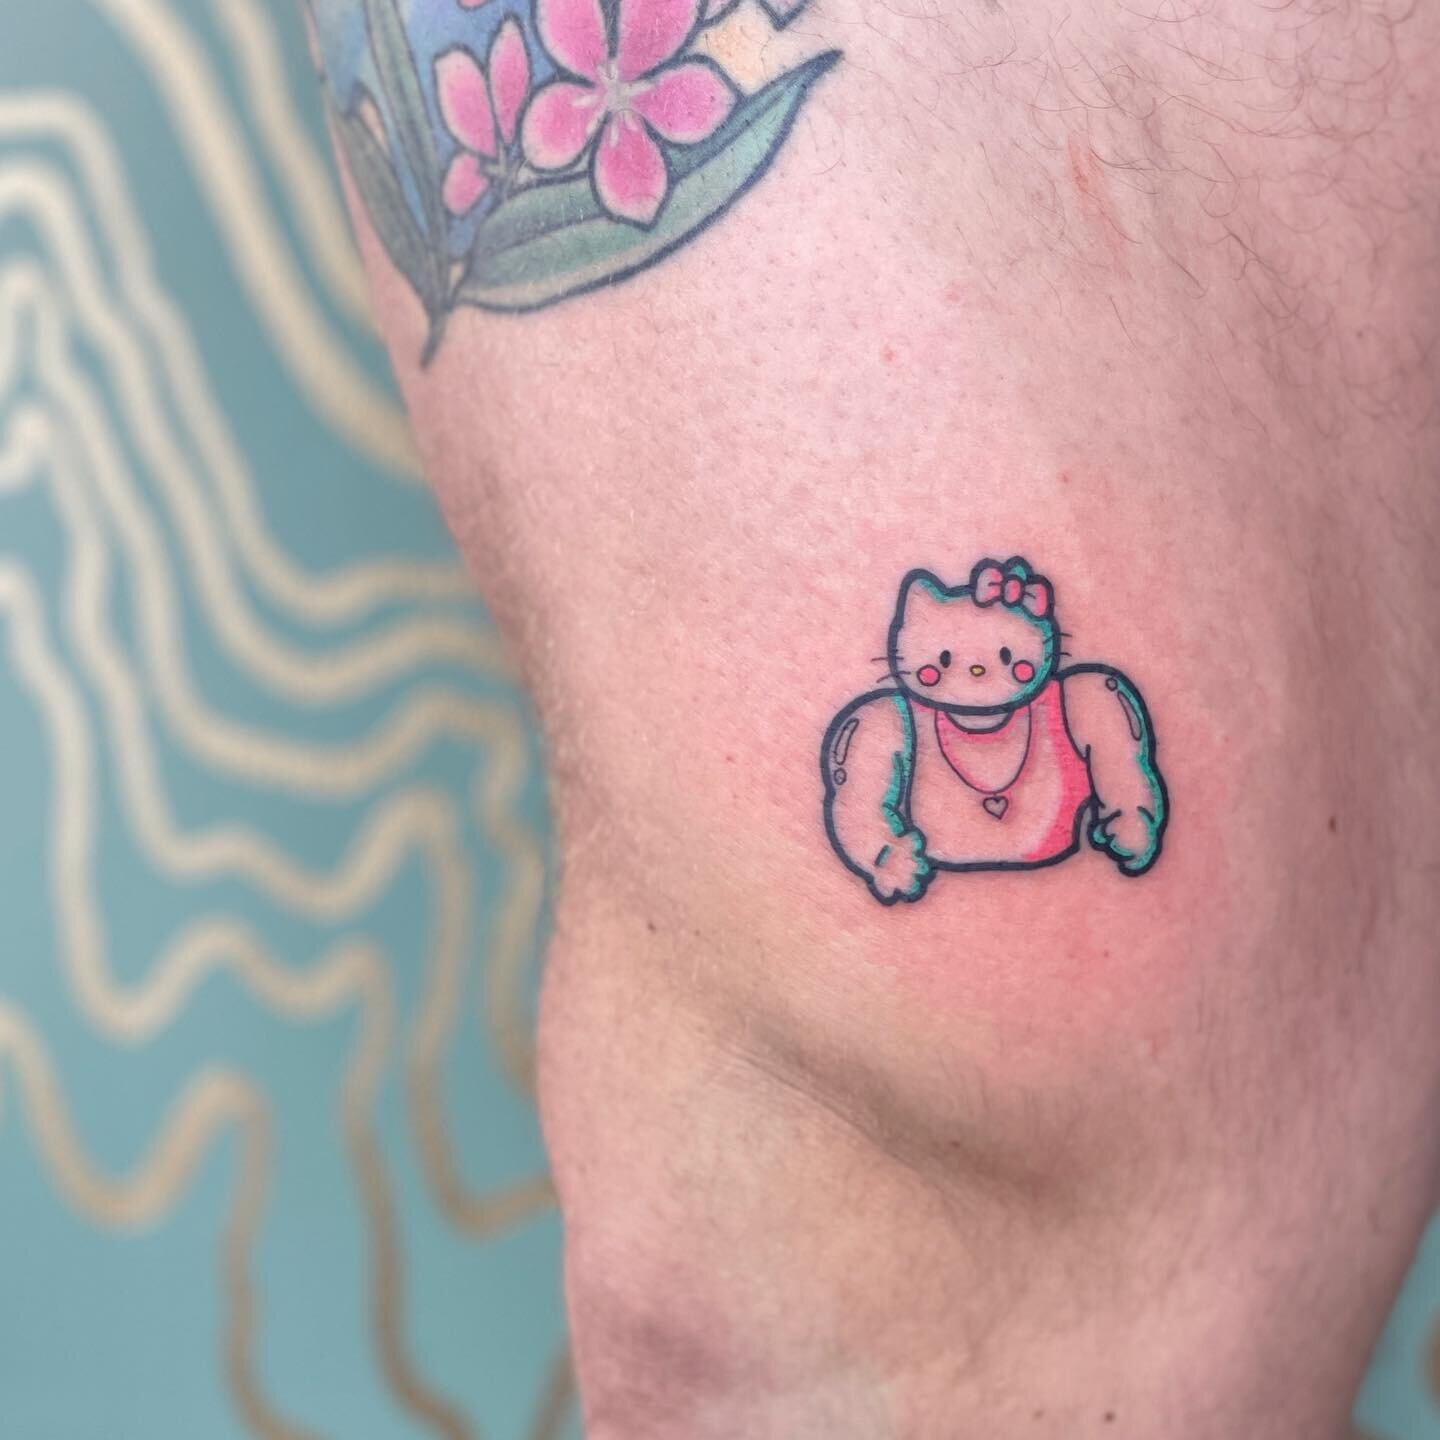 Hello Kitty 🐱 💪🏽 
。
Inspired by and credit to internet memes
。
Thank you for the trust!
。
Calgary 🇨🇦 Booking Open
。
Pick yours or dm to customize your own tattoo💫
。
Creation has NOTHING to do with real life event or designs.
。
DM for more detai